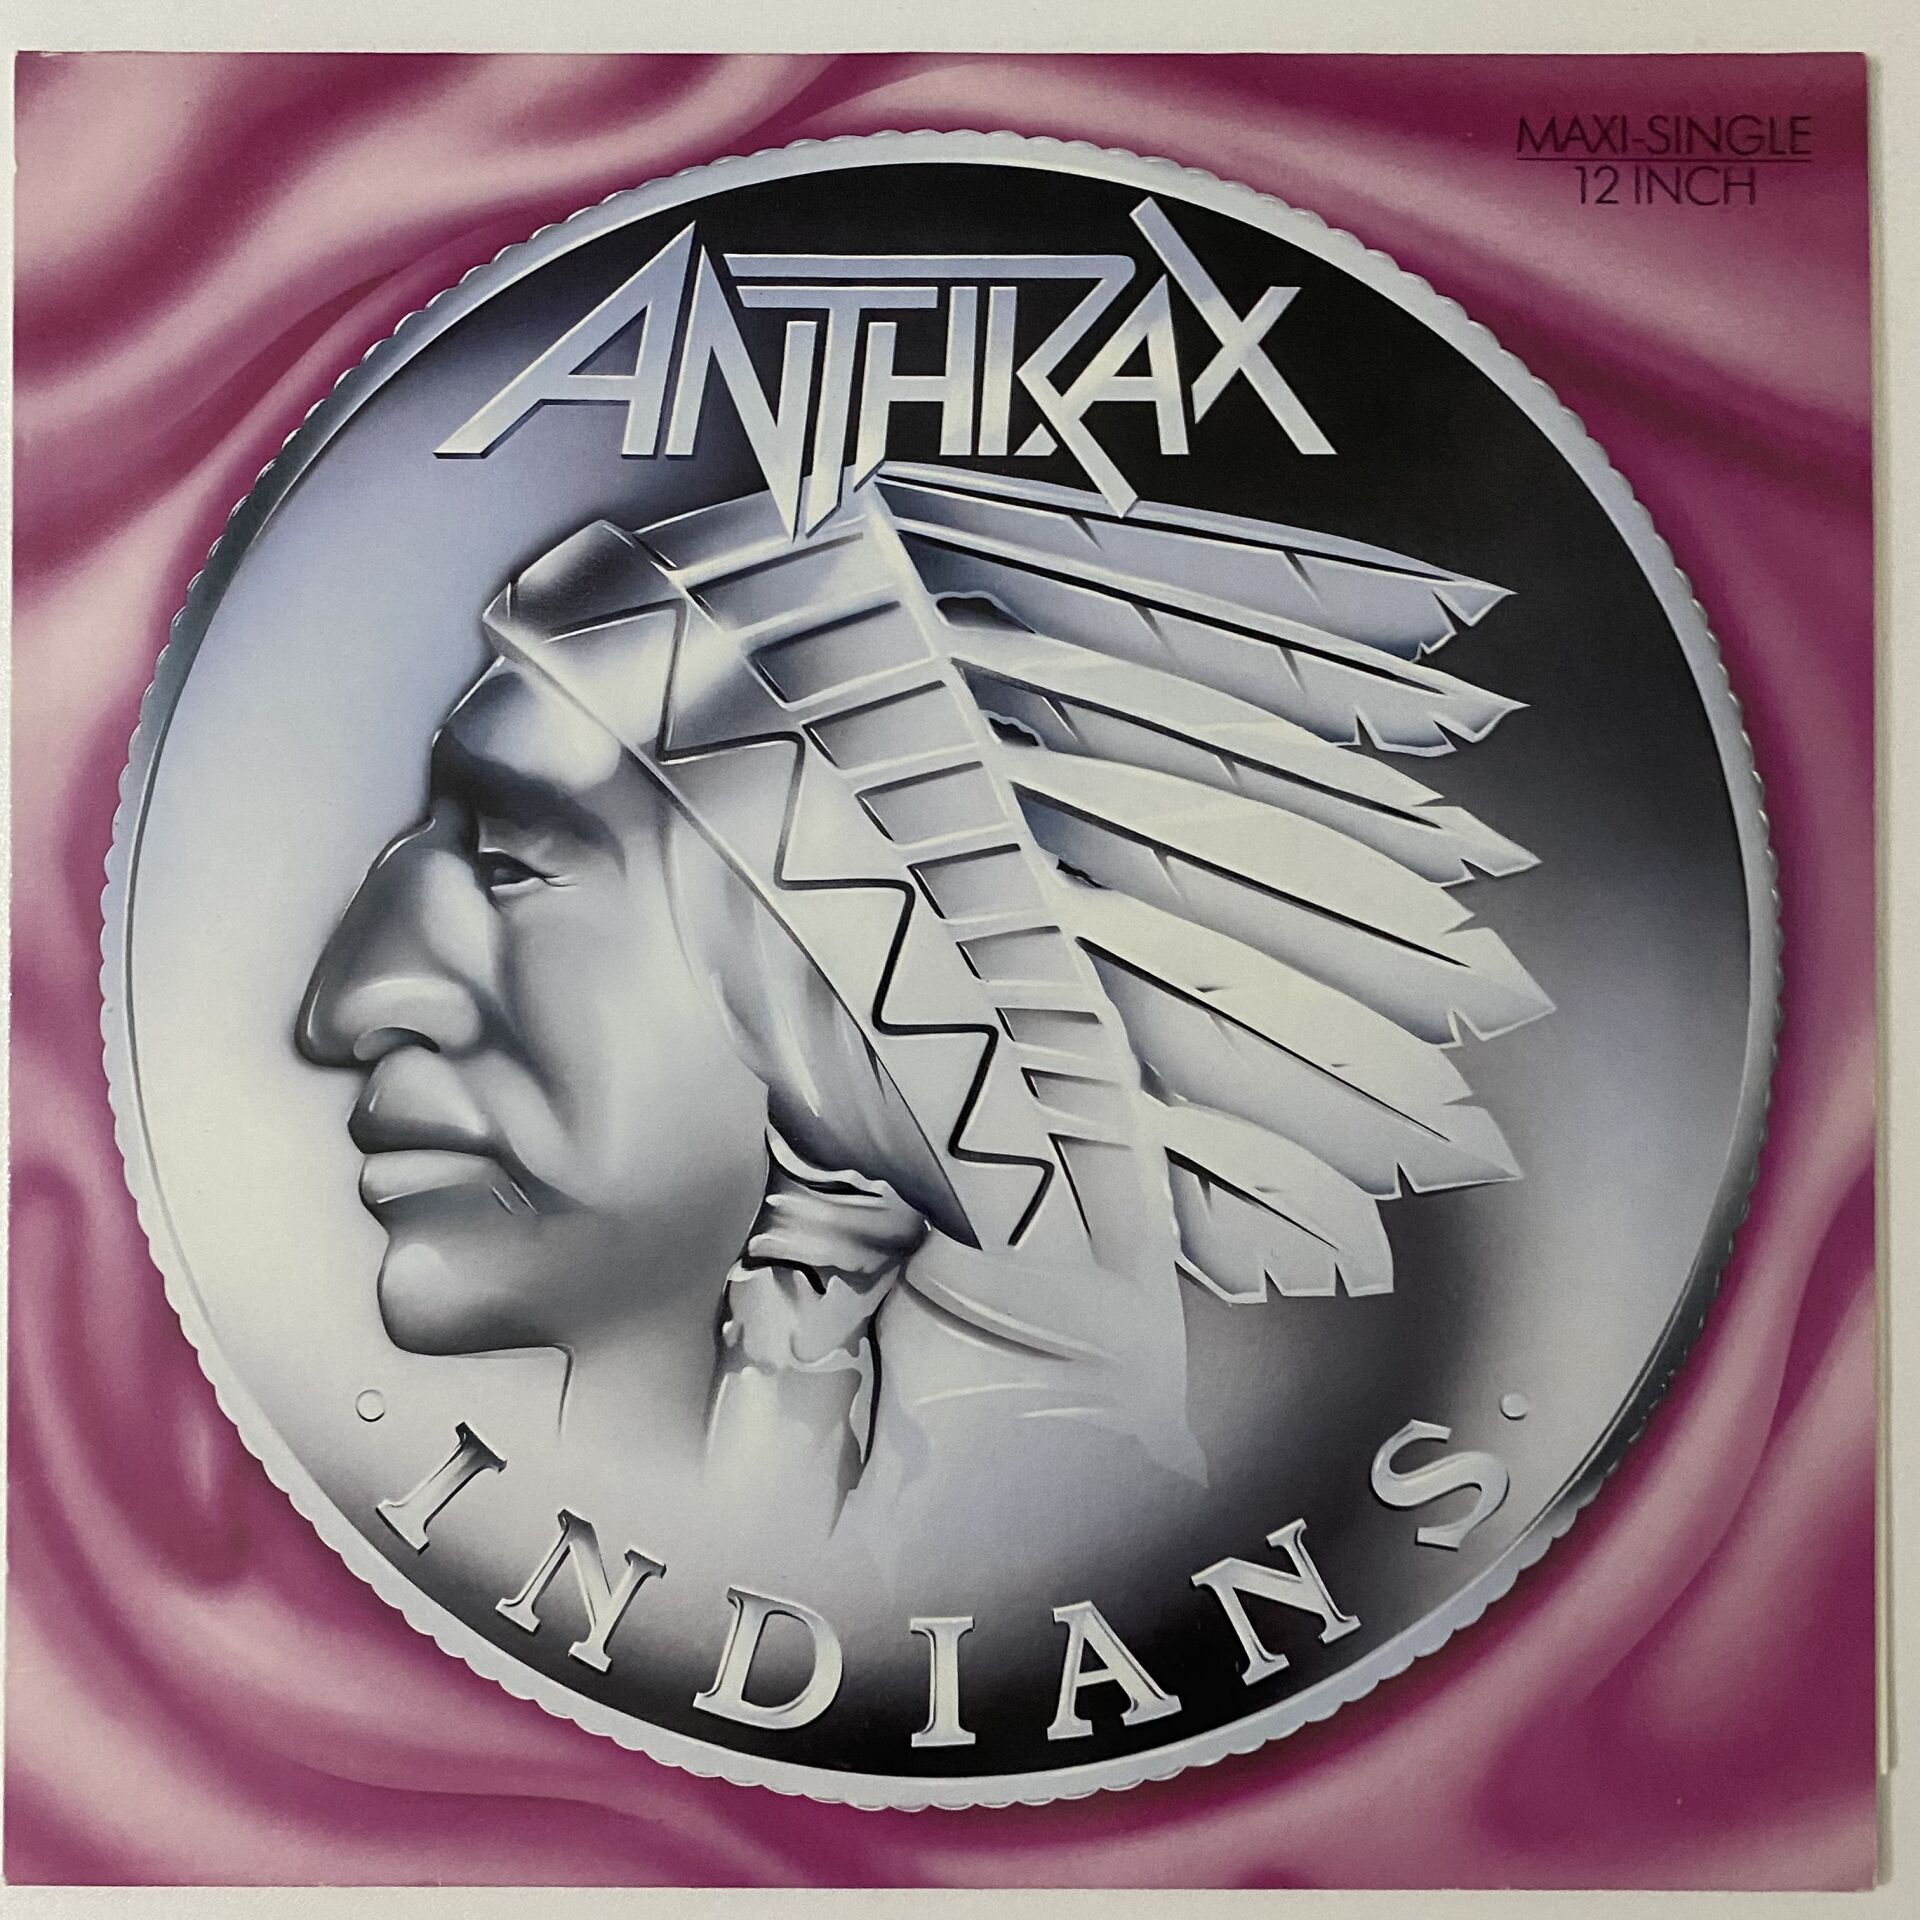 Anthrax – Indians